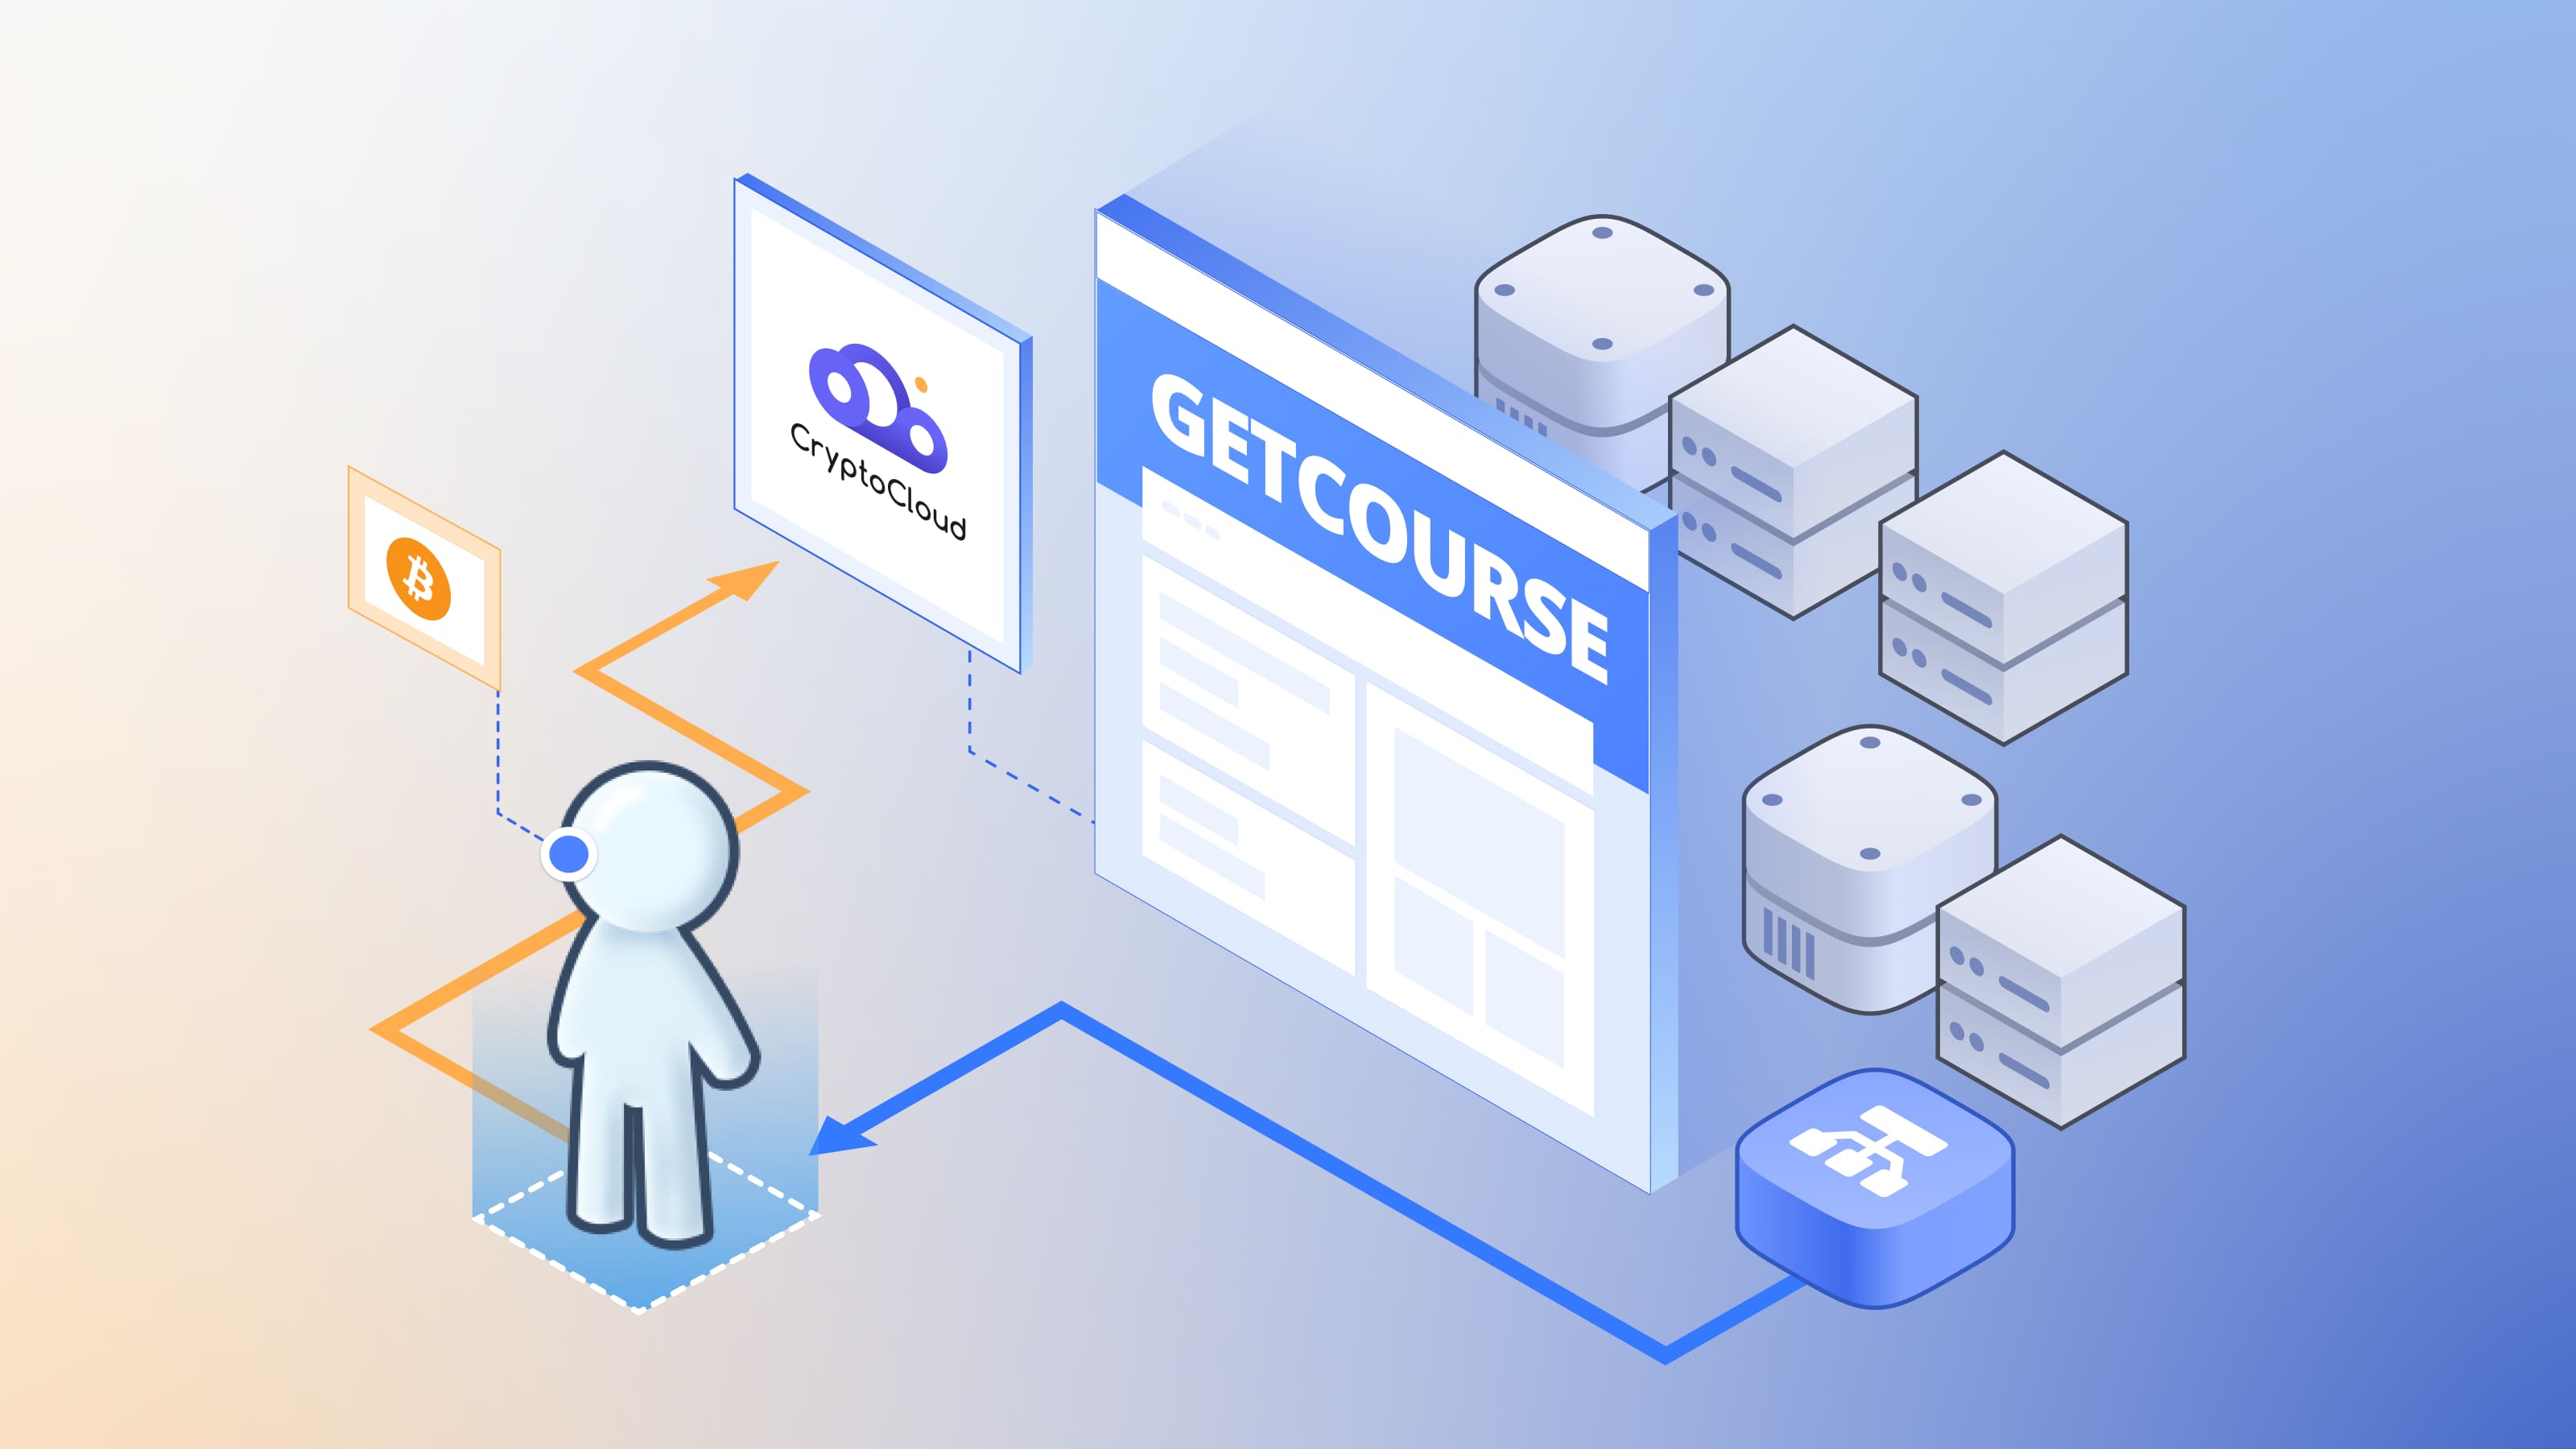 CryptoCloud offers its users a ready-made module for GetCourse.